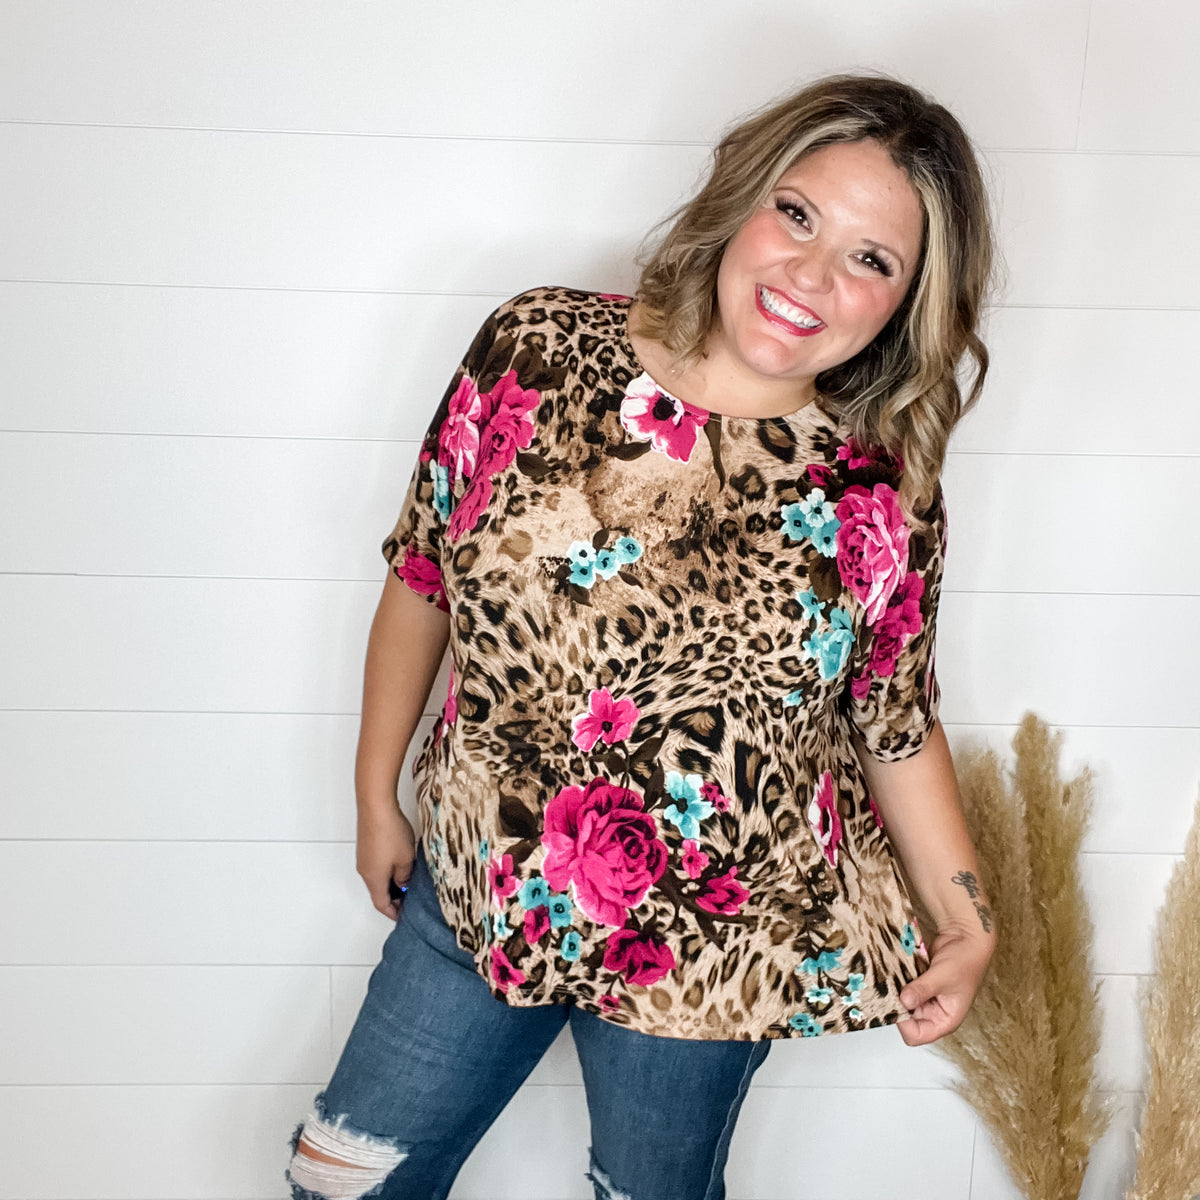 "Buzzy" Floral and Animal Print Cuffed Short Sleeve